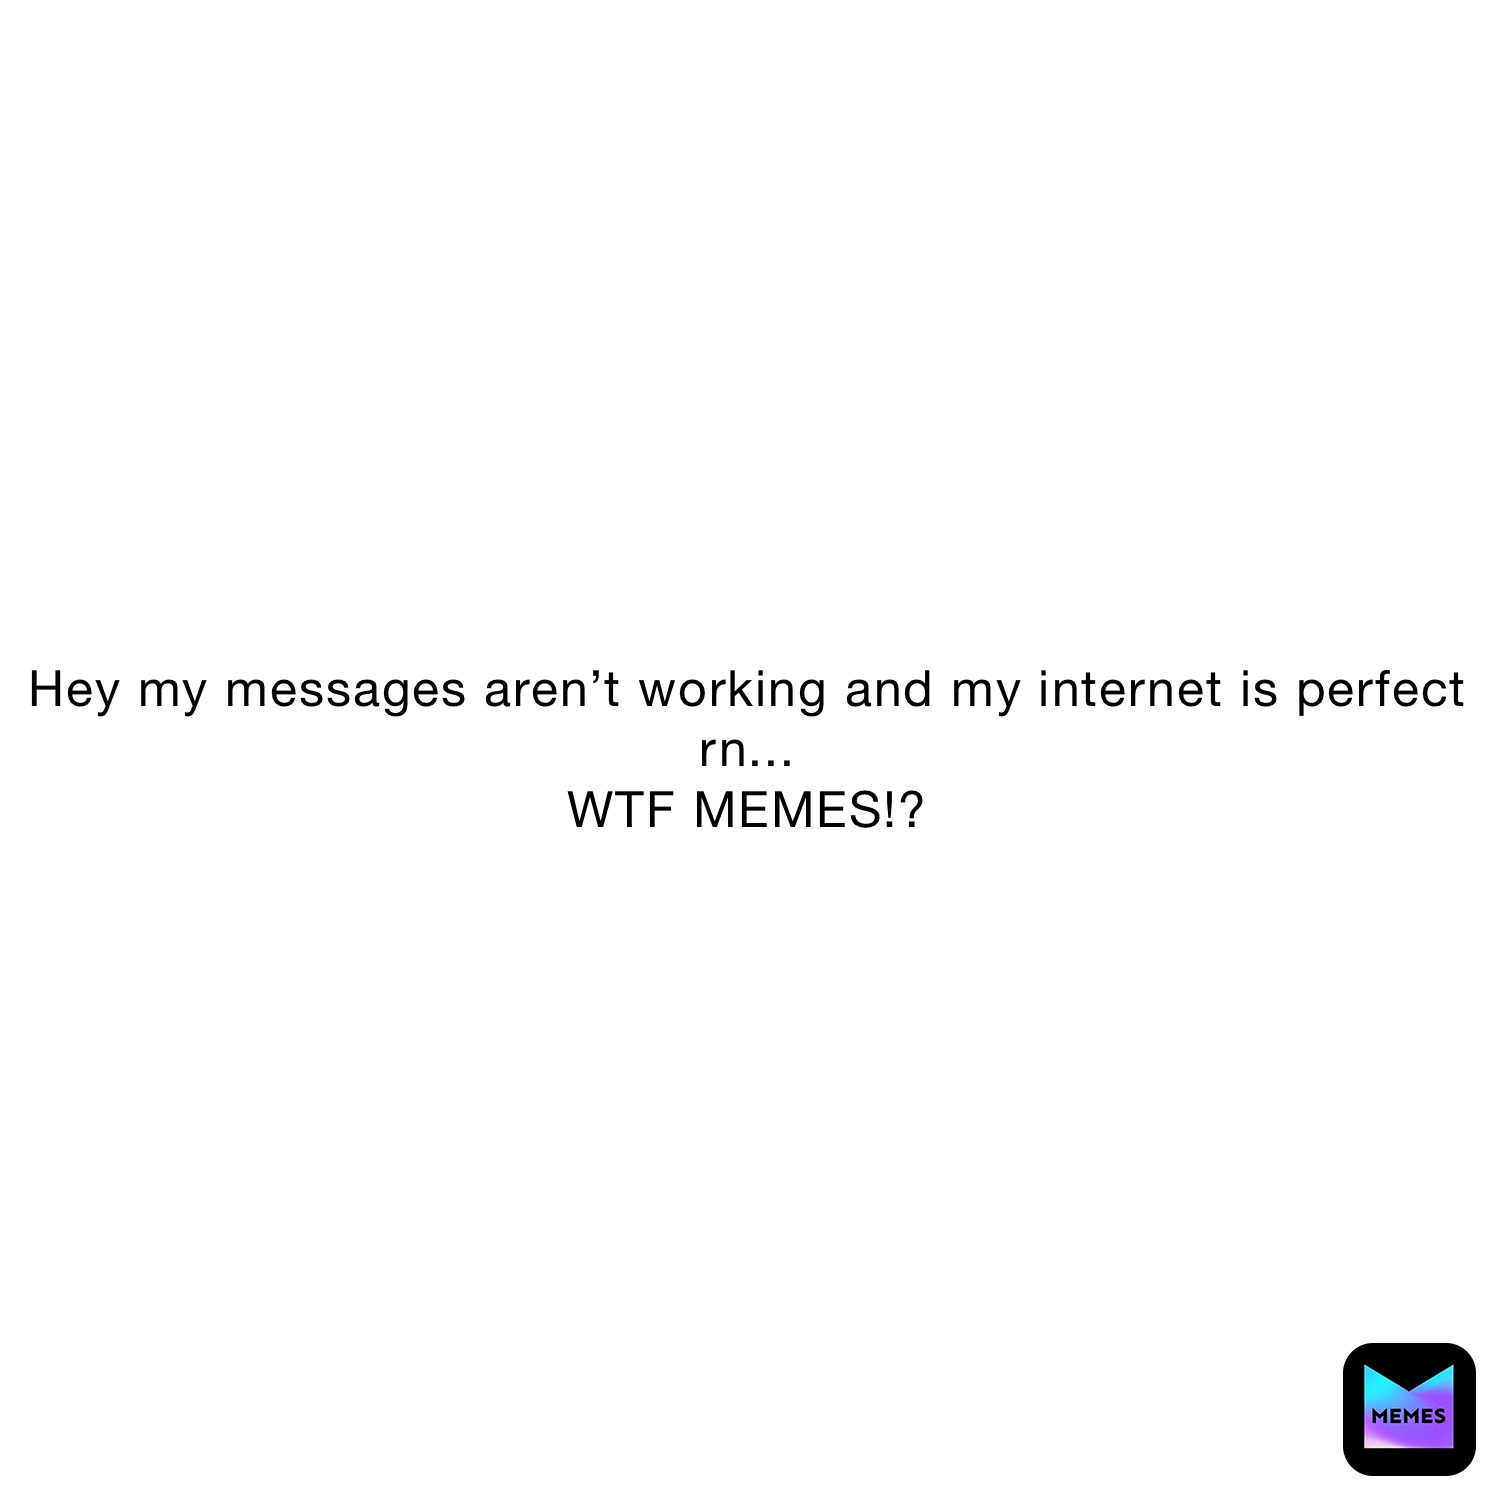 Hey my messages aren’t working and my internet is perfect rn...
WTF MEMES!?